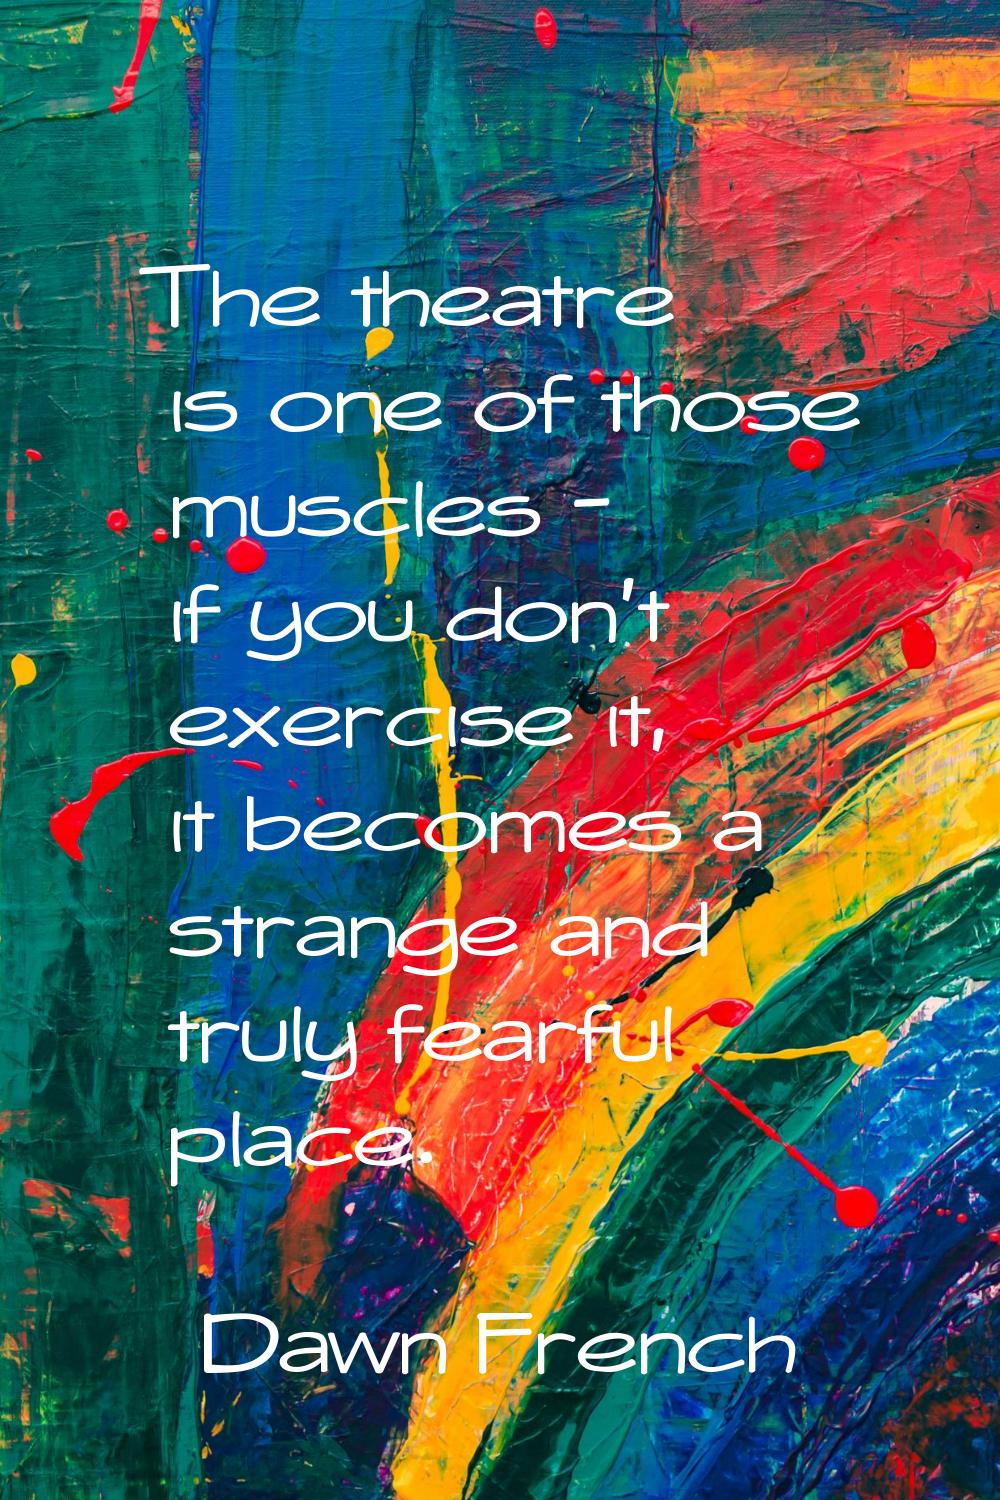 The theatre is one of those muscles - if you don't exercise it, it becomes a strange and truly fear